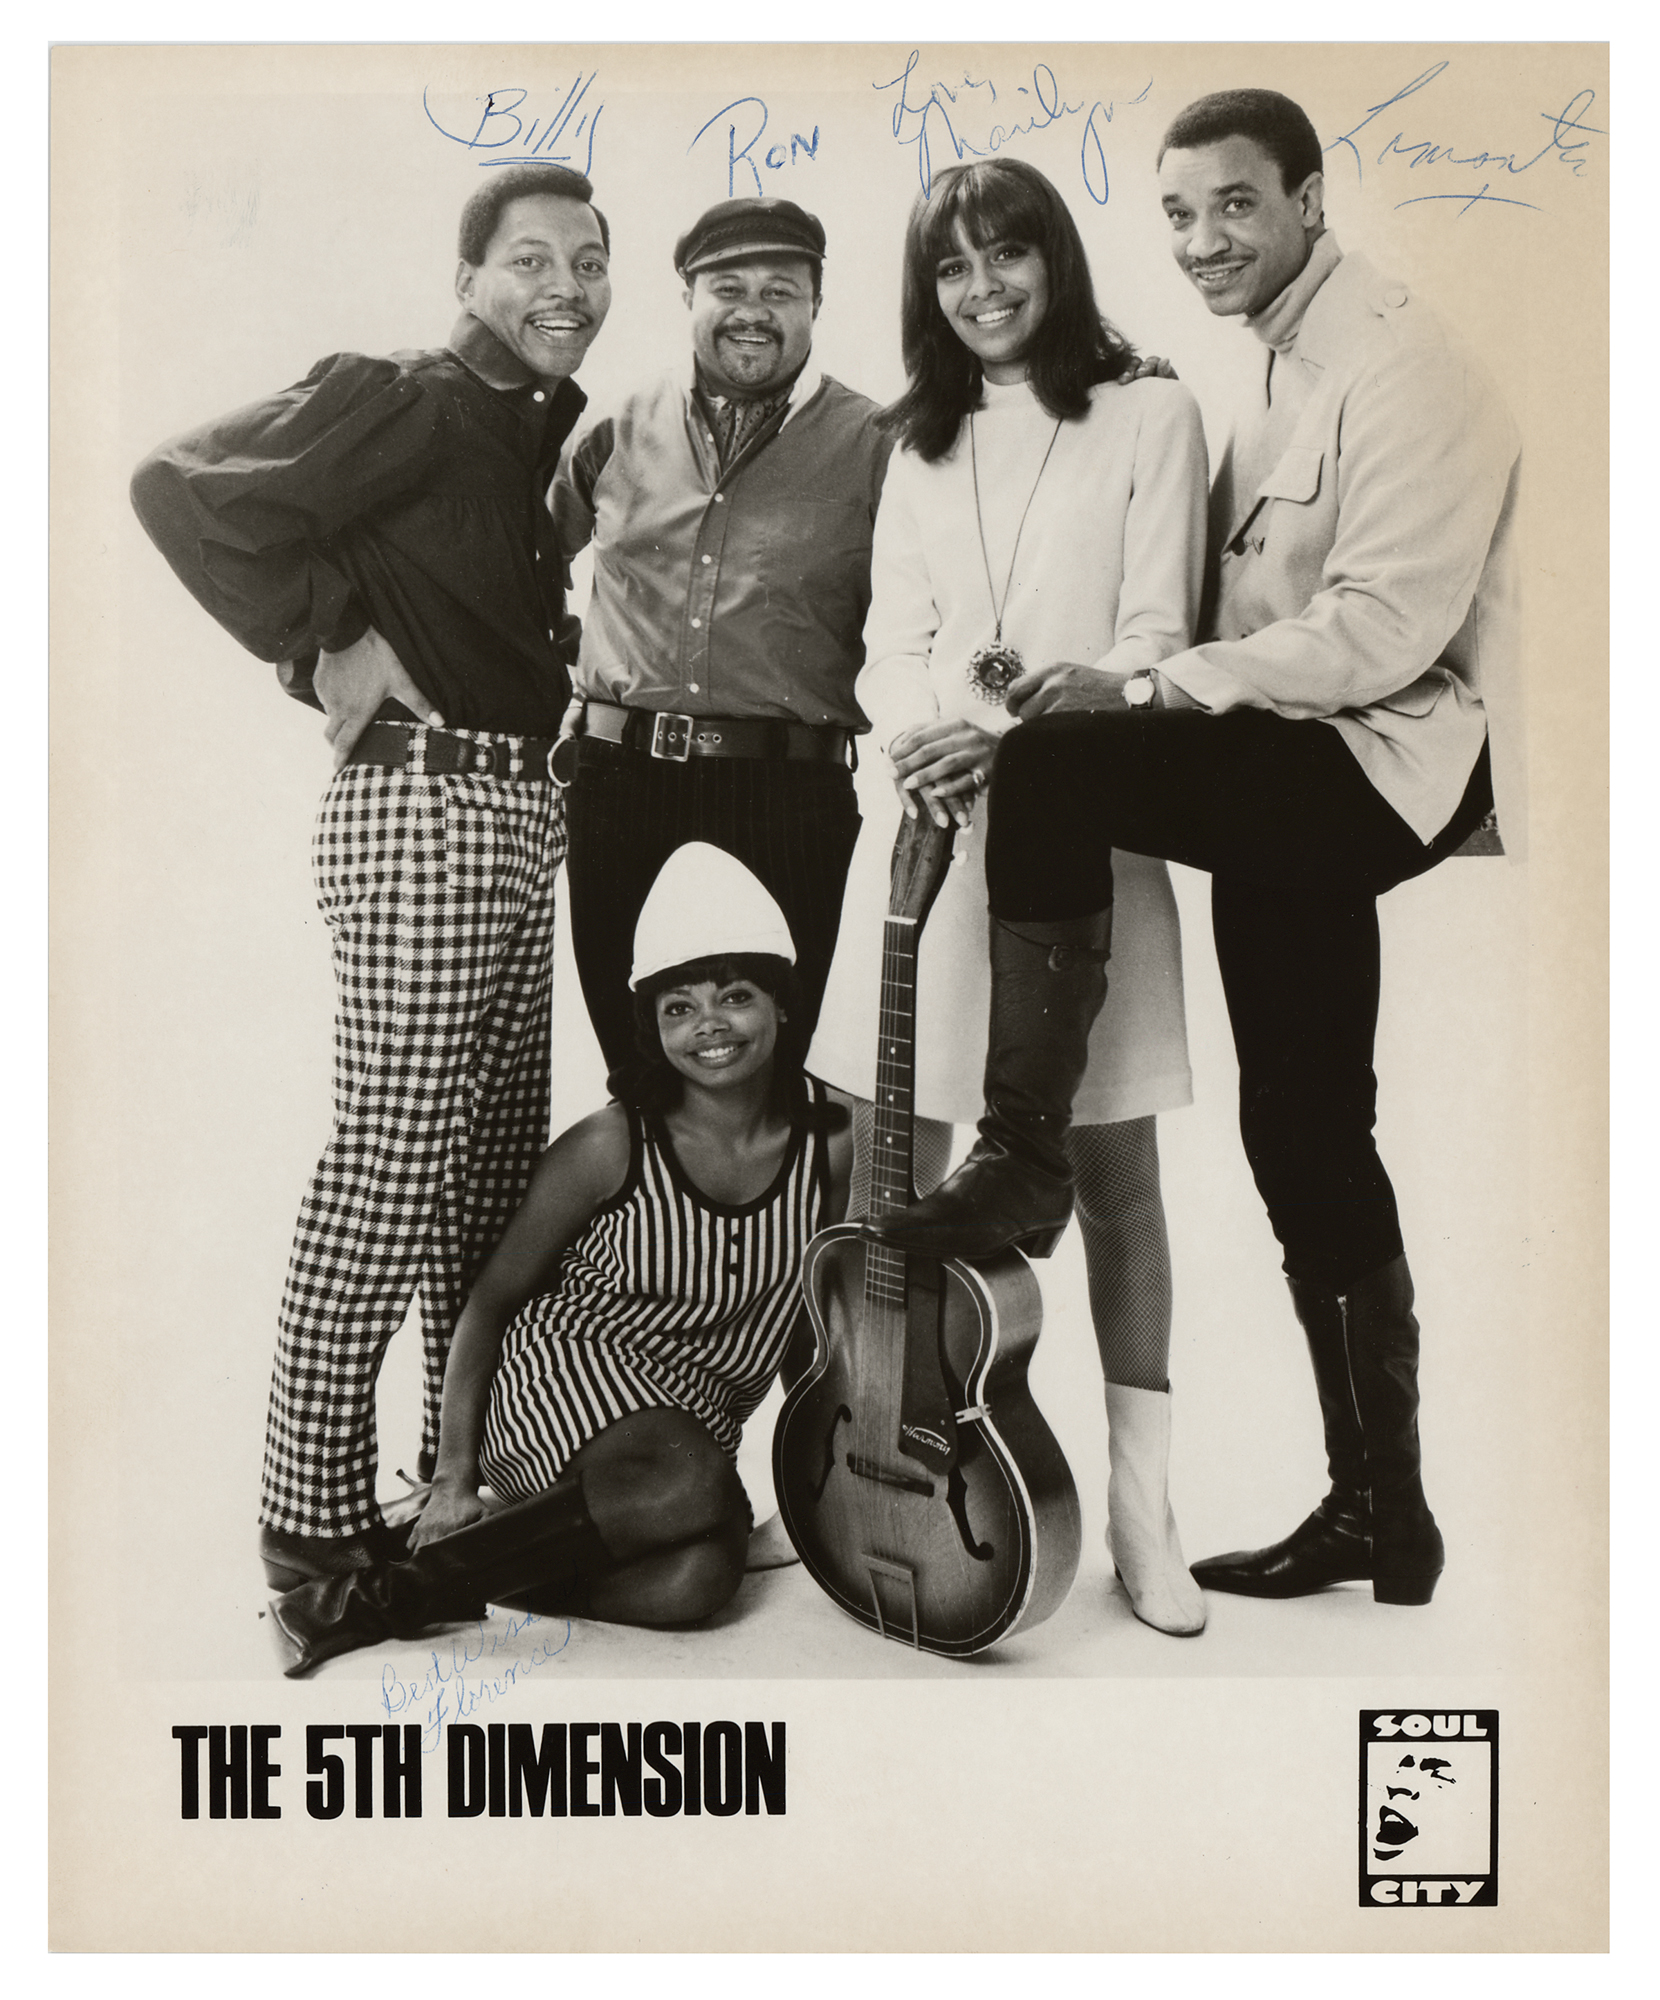 Lot #4280 The 5th Dimension Signed Photograph